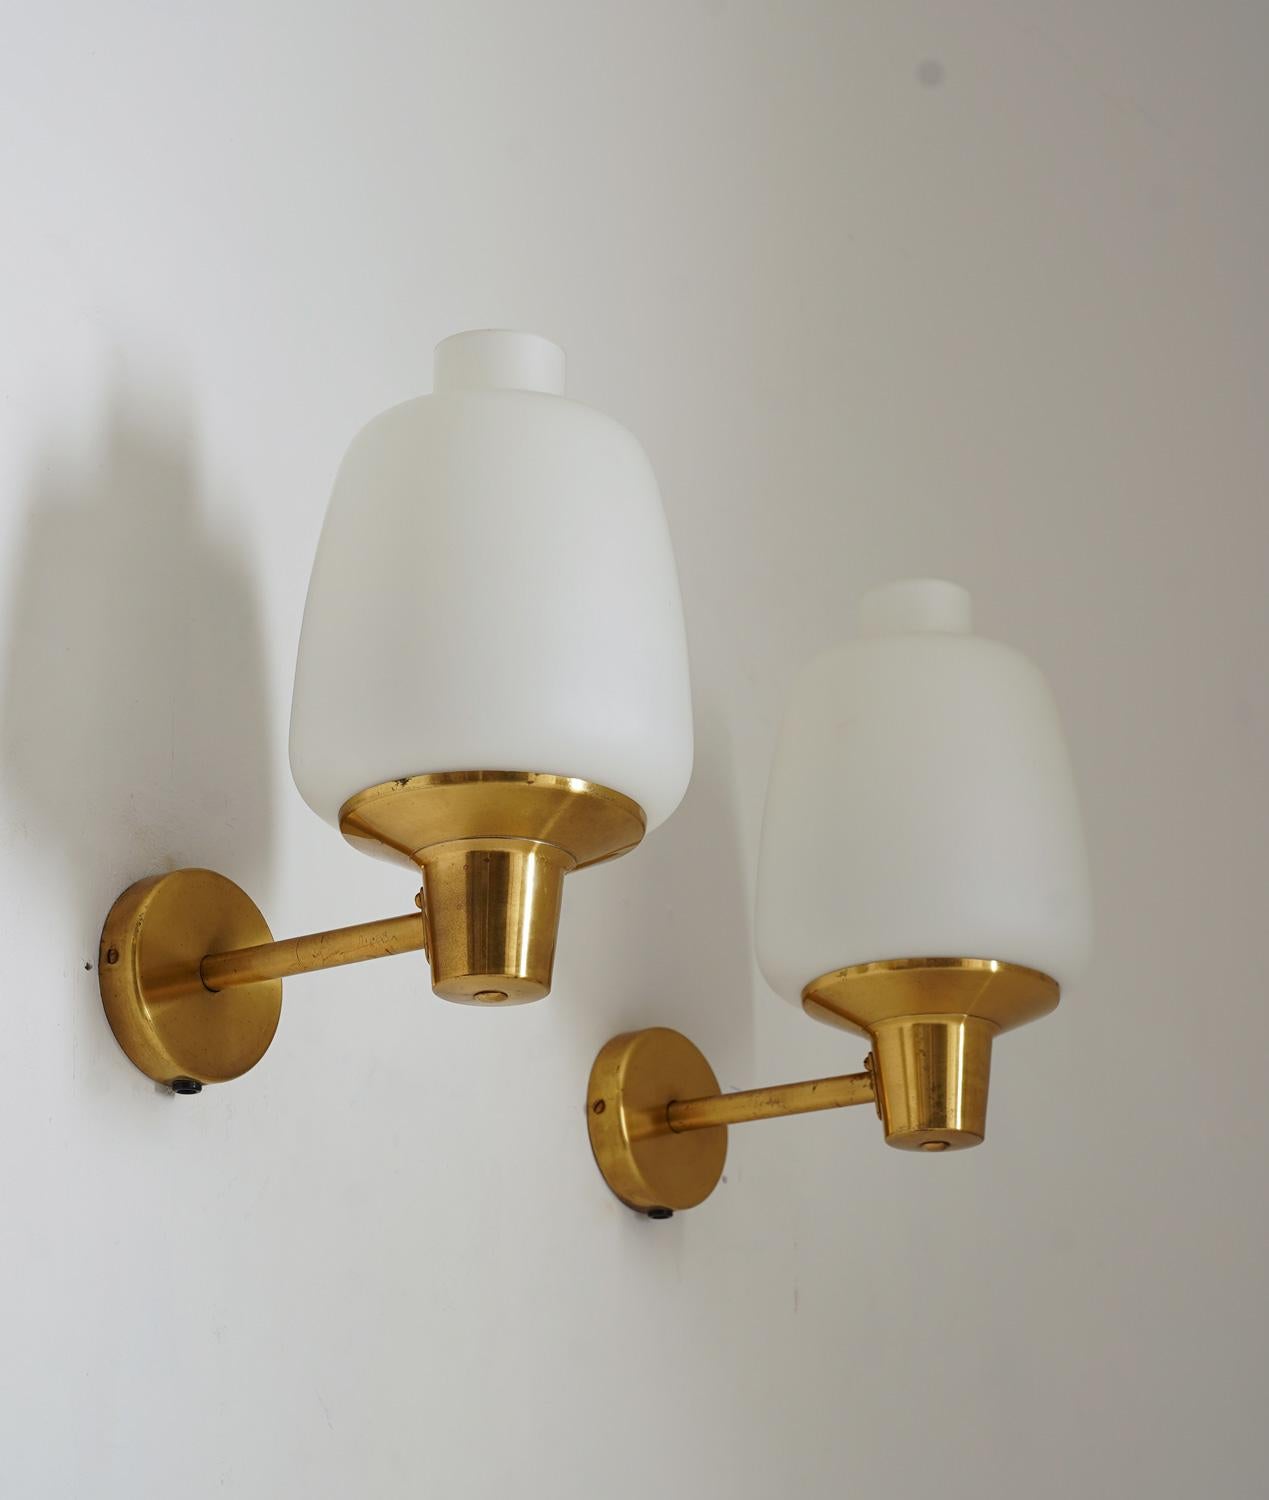 Pair of wall lights/sconces manufactured by Høvik Lys in Norway, 1940s.

Each lamp features one light source, hidden by a frosted glass shade. 

Condition: Very good original condition. 
